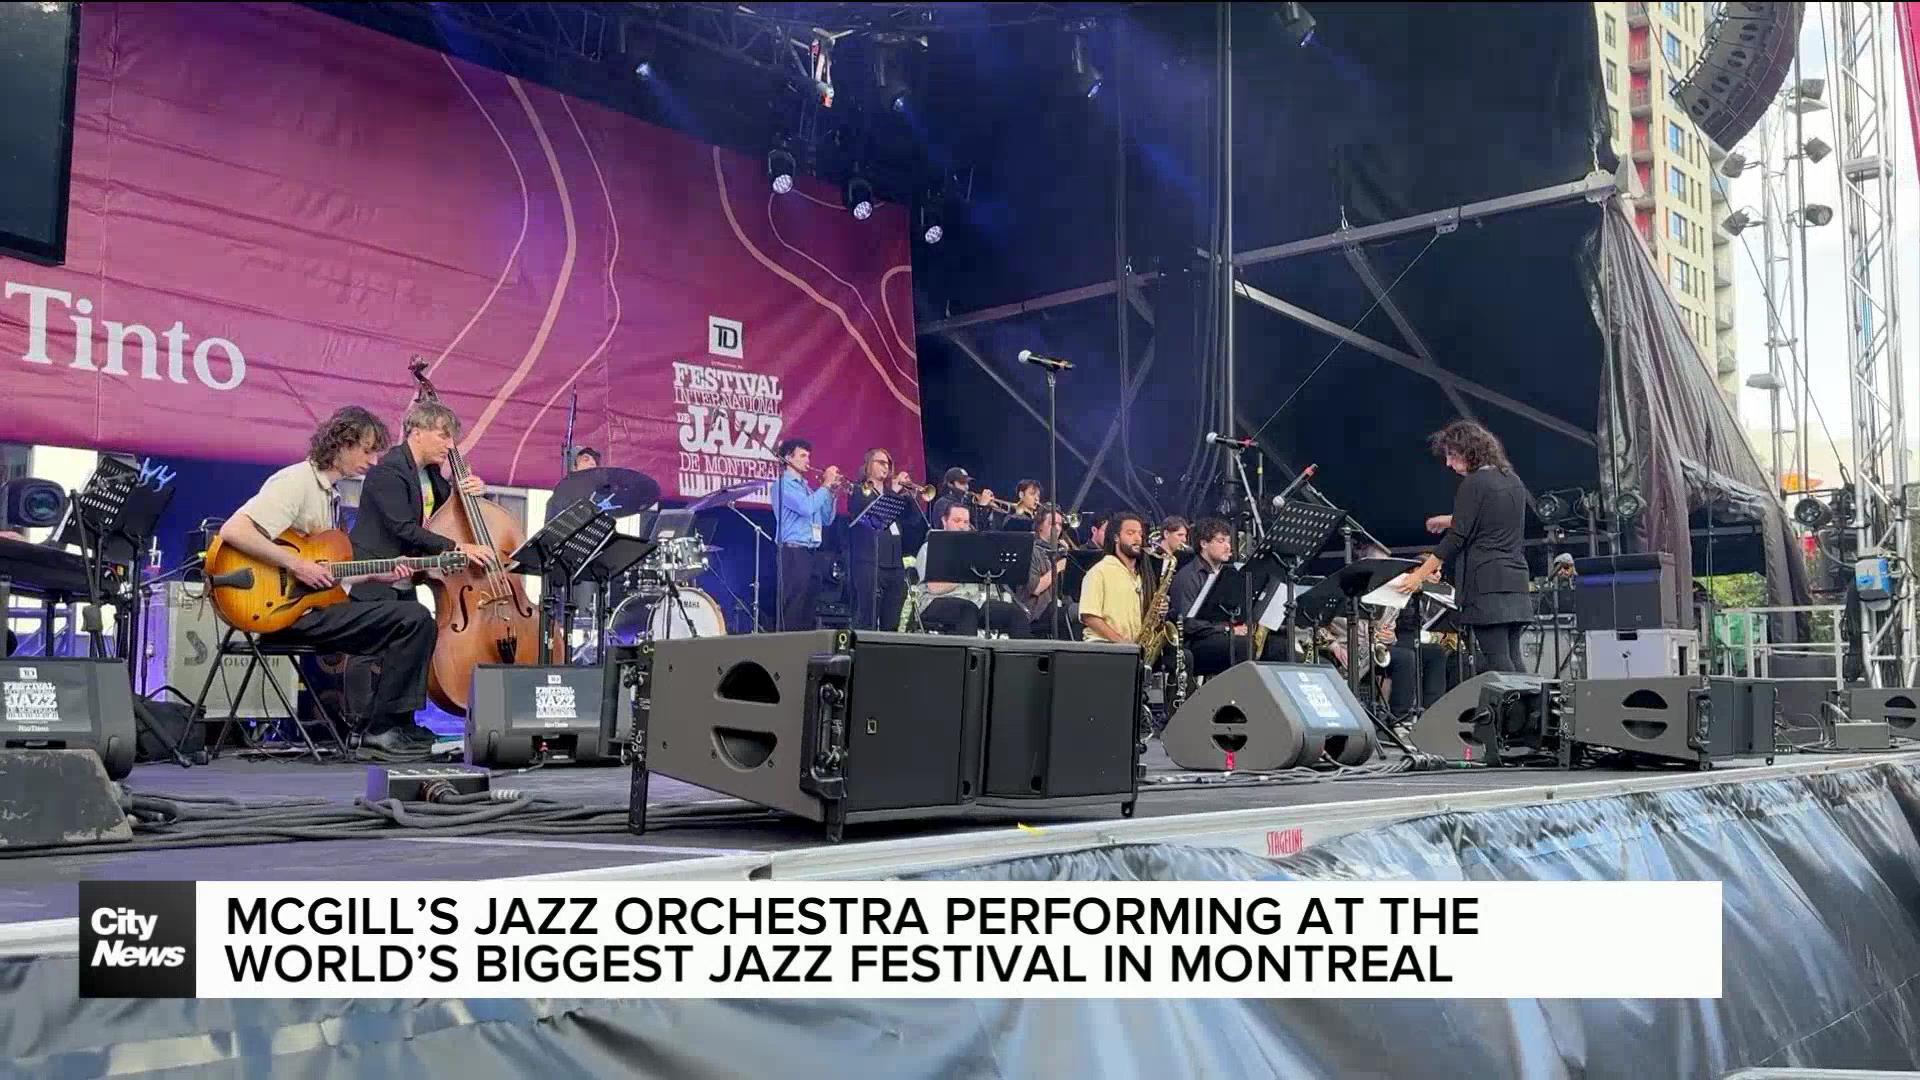 McGill’s Jazz Orchestra perform at the world’s biggest jazz festival